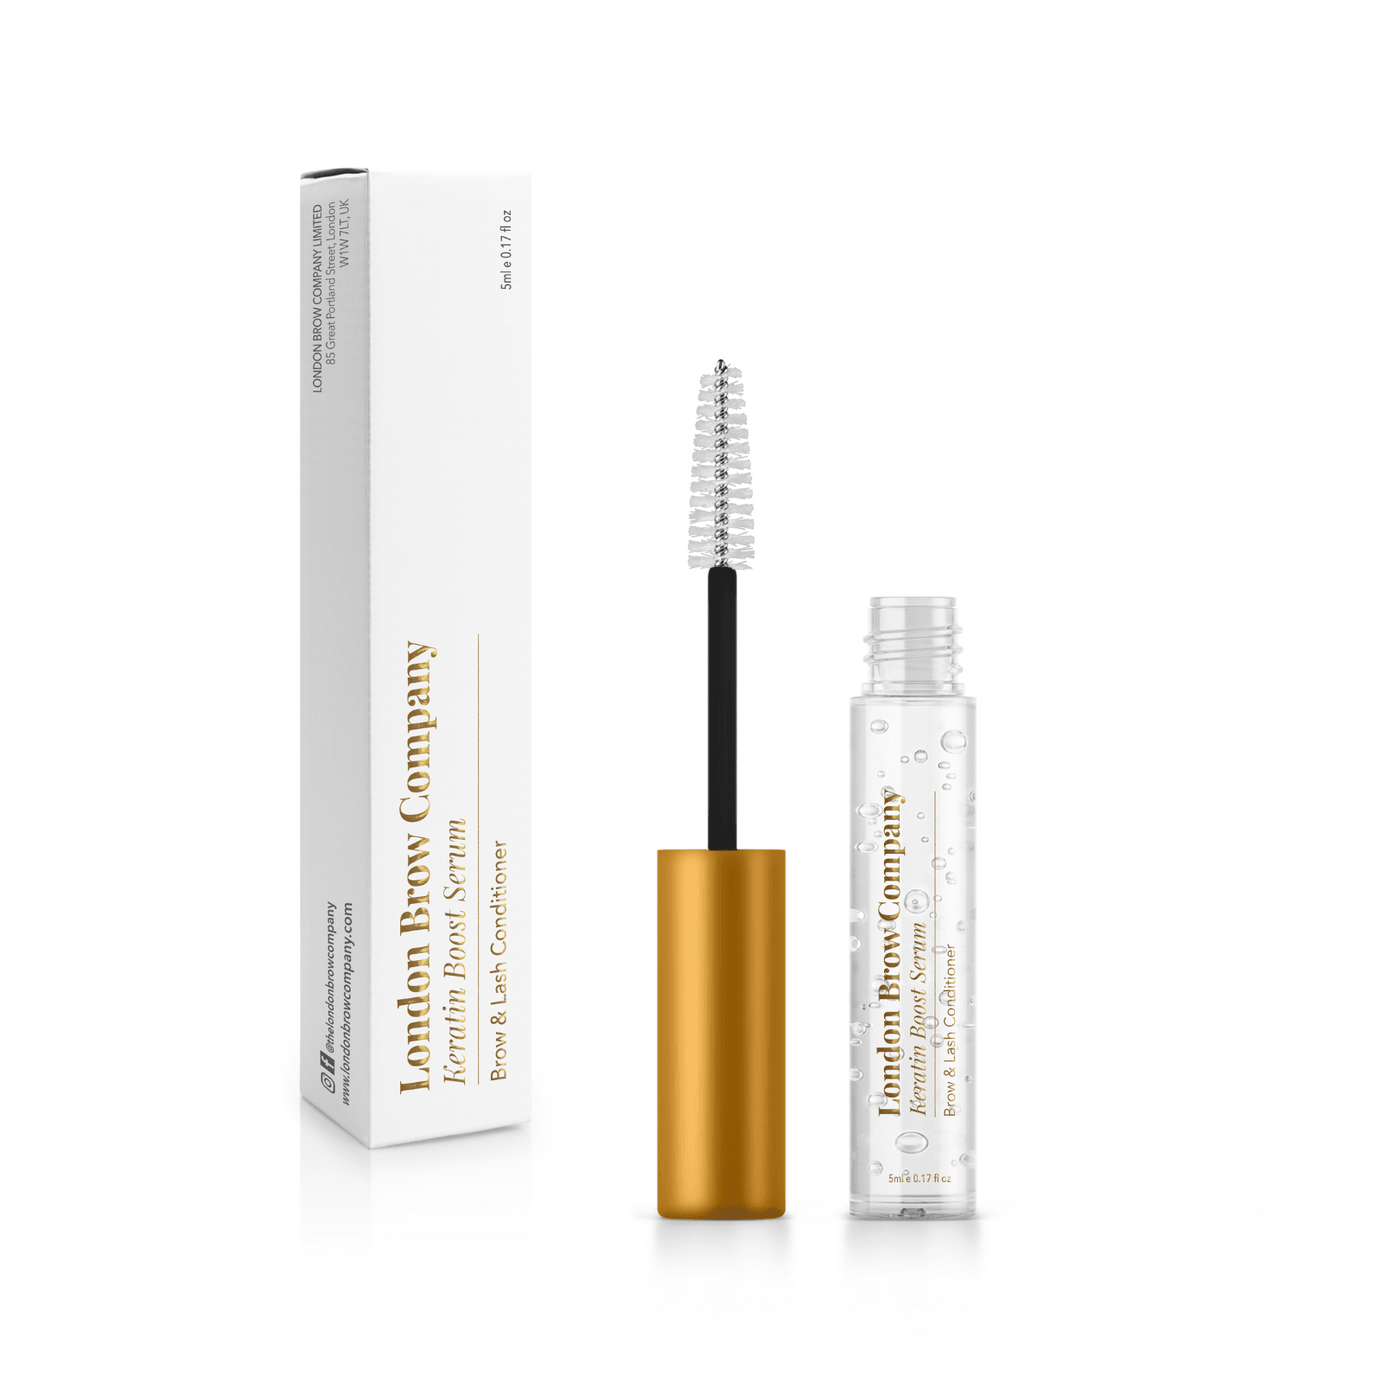 Keratin Brow Boost Serum: Nourishing Care for Laminated Brows and Lifted Lashes - The London Brow Company